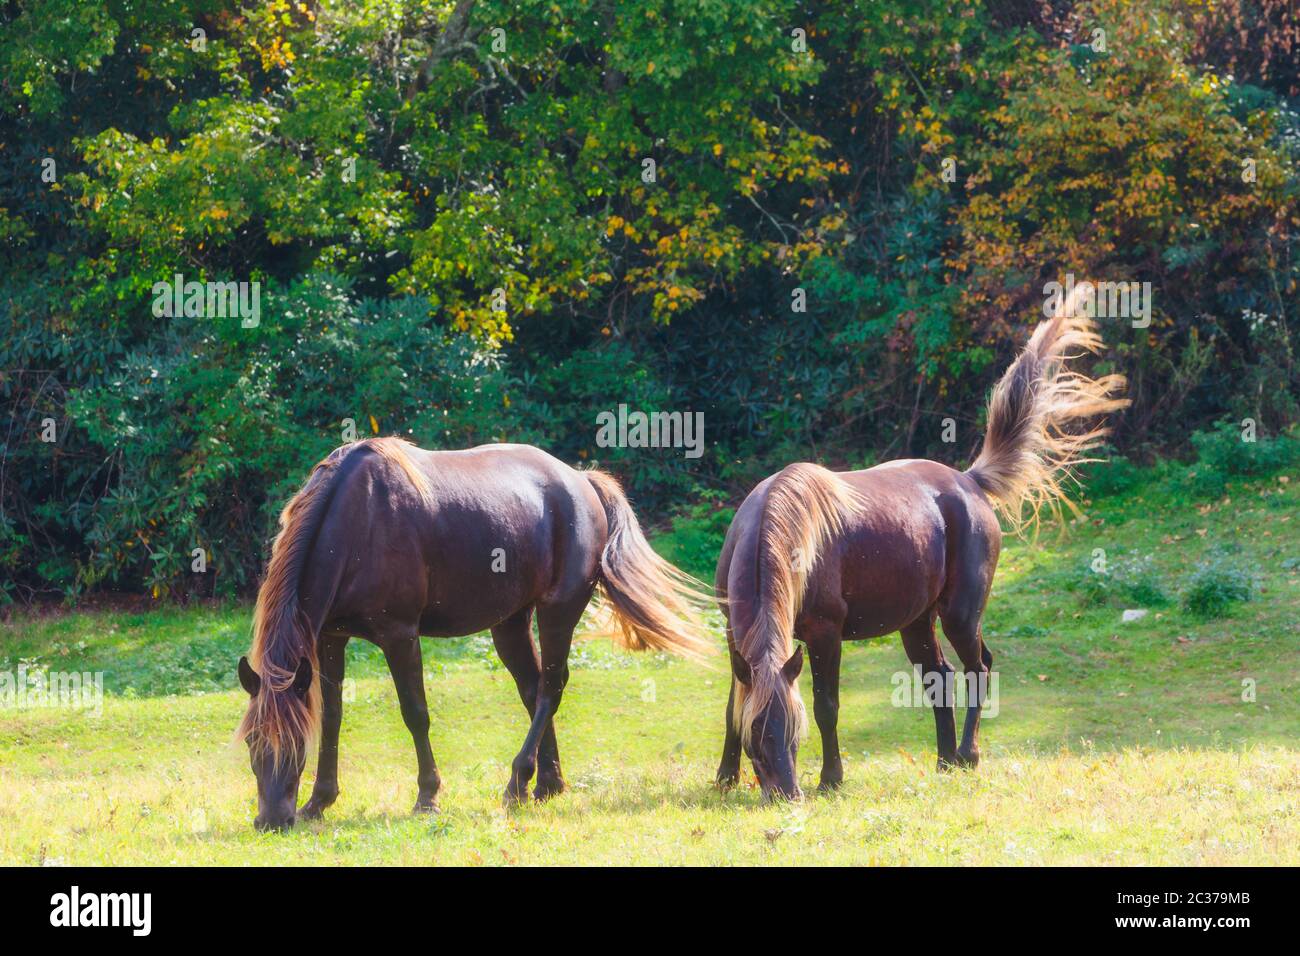 Two brown horses (Equus ferus caballus) grazing in a field.  Flies surround their heads. Stock Photo